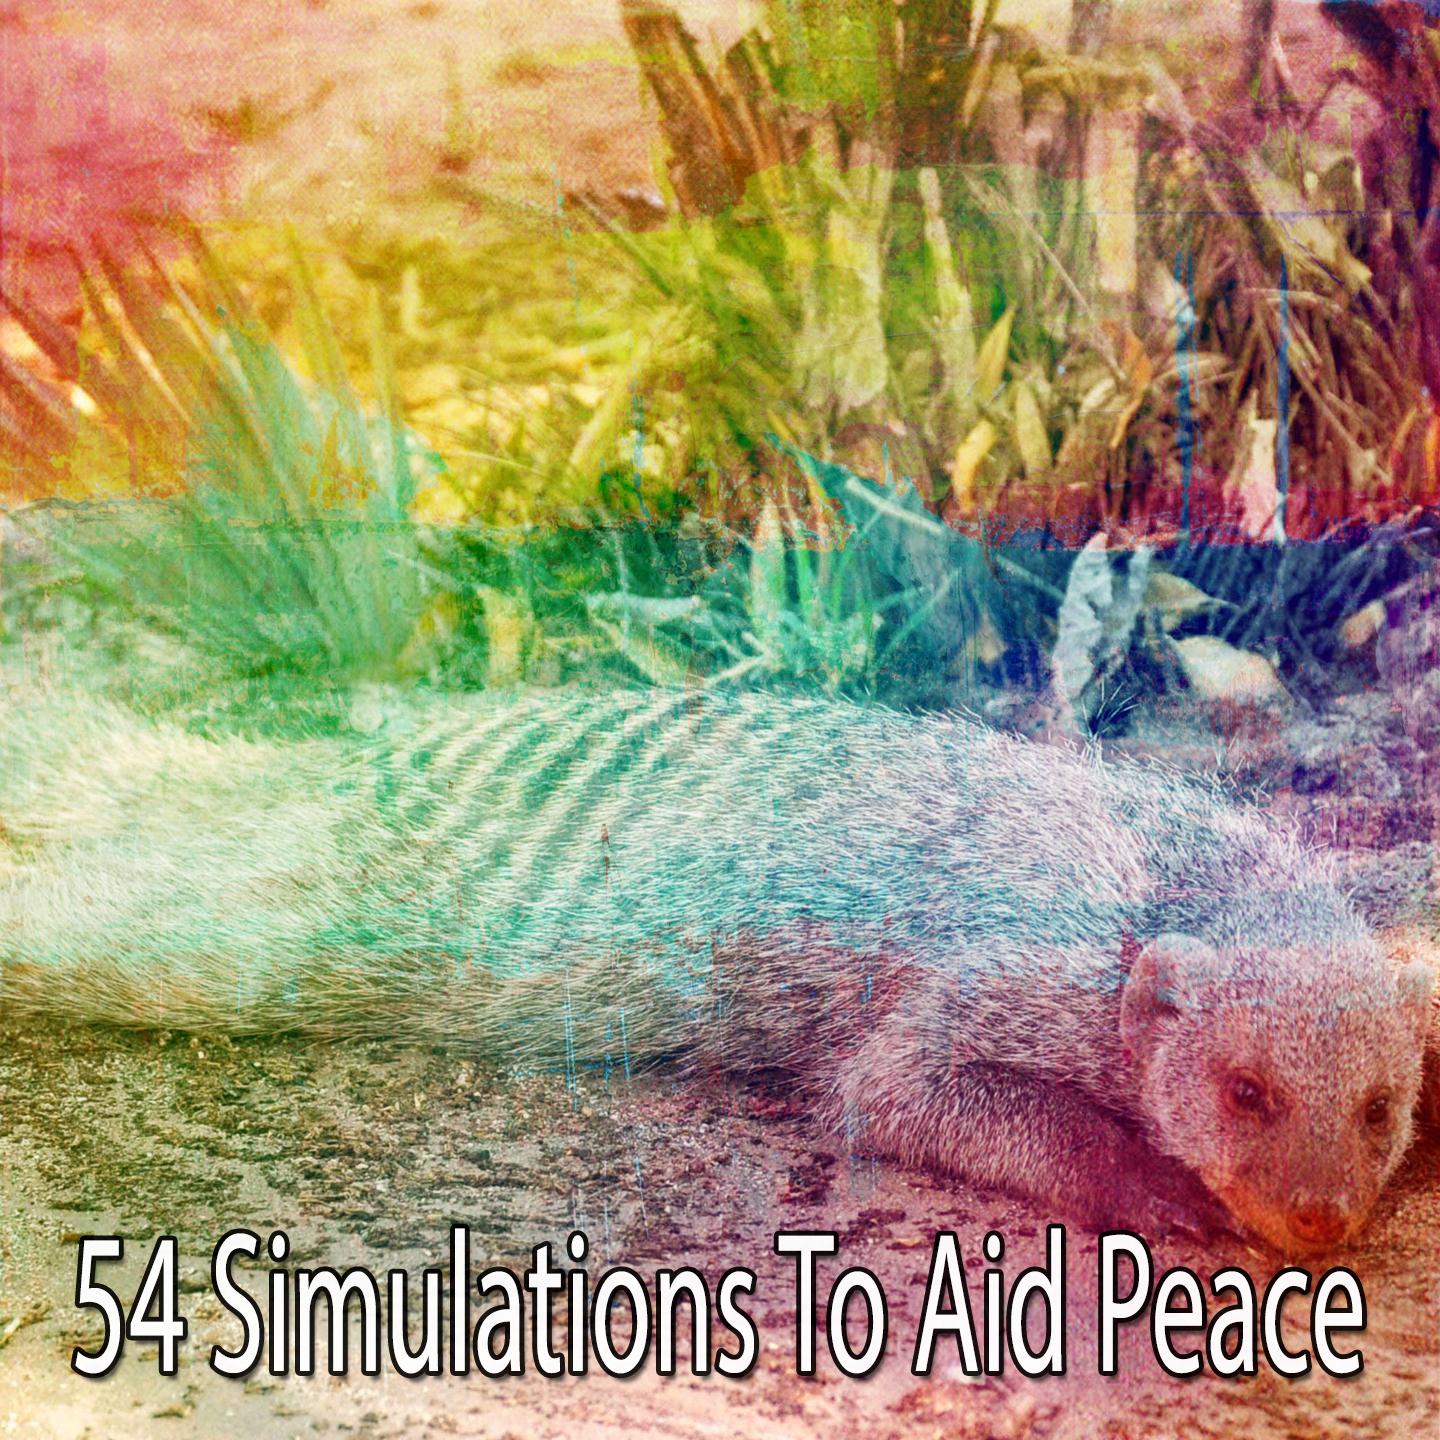 54 Simulations to Aid Peace